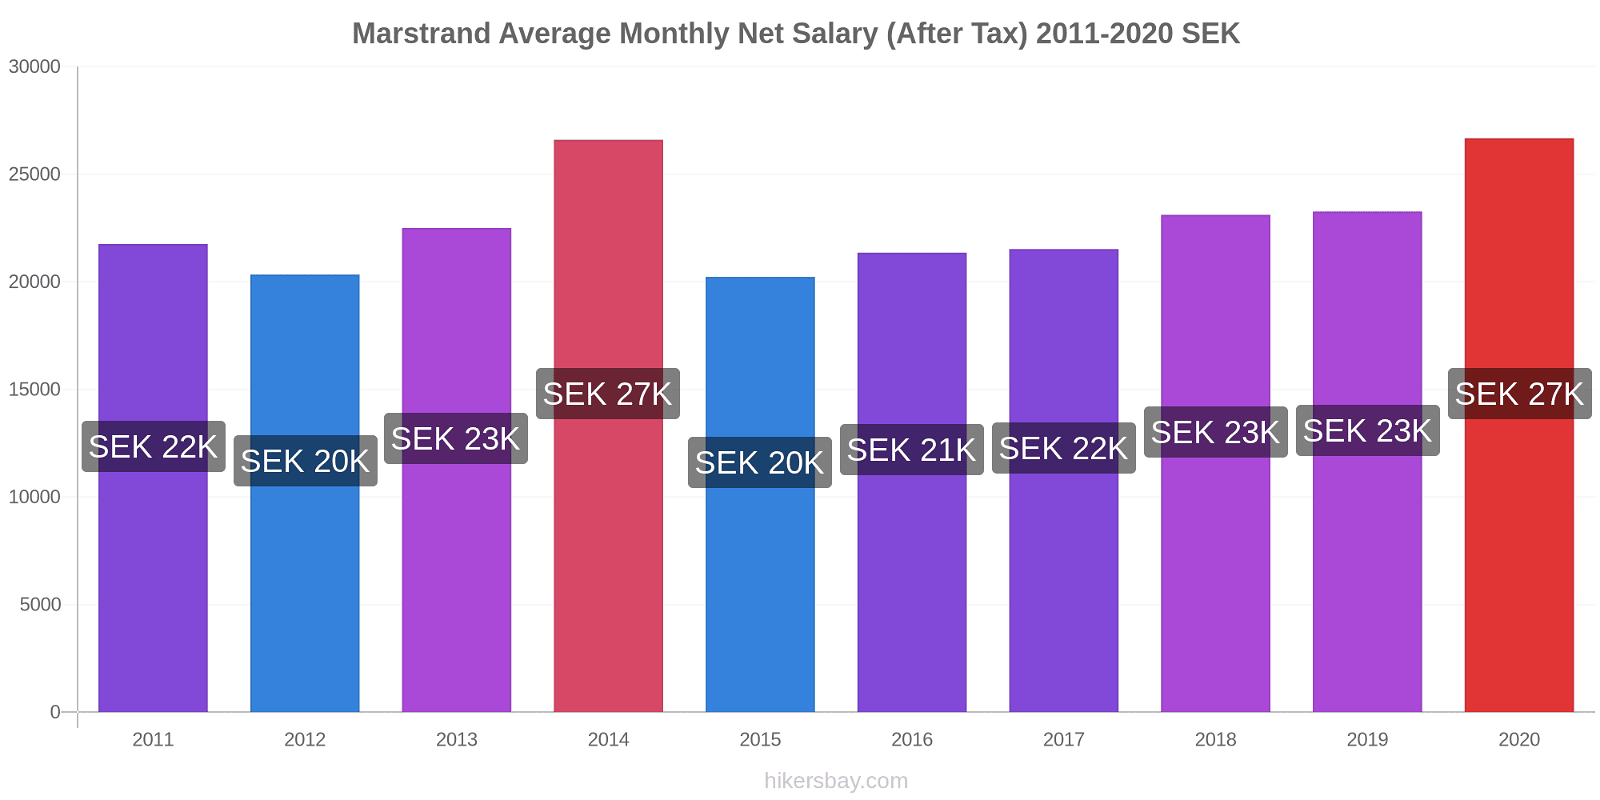 Marstrand price changes Average Monthly Net Salary (After Tax) hikersbay.com